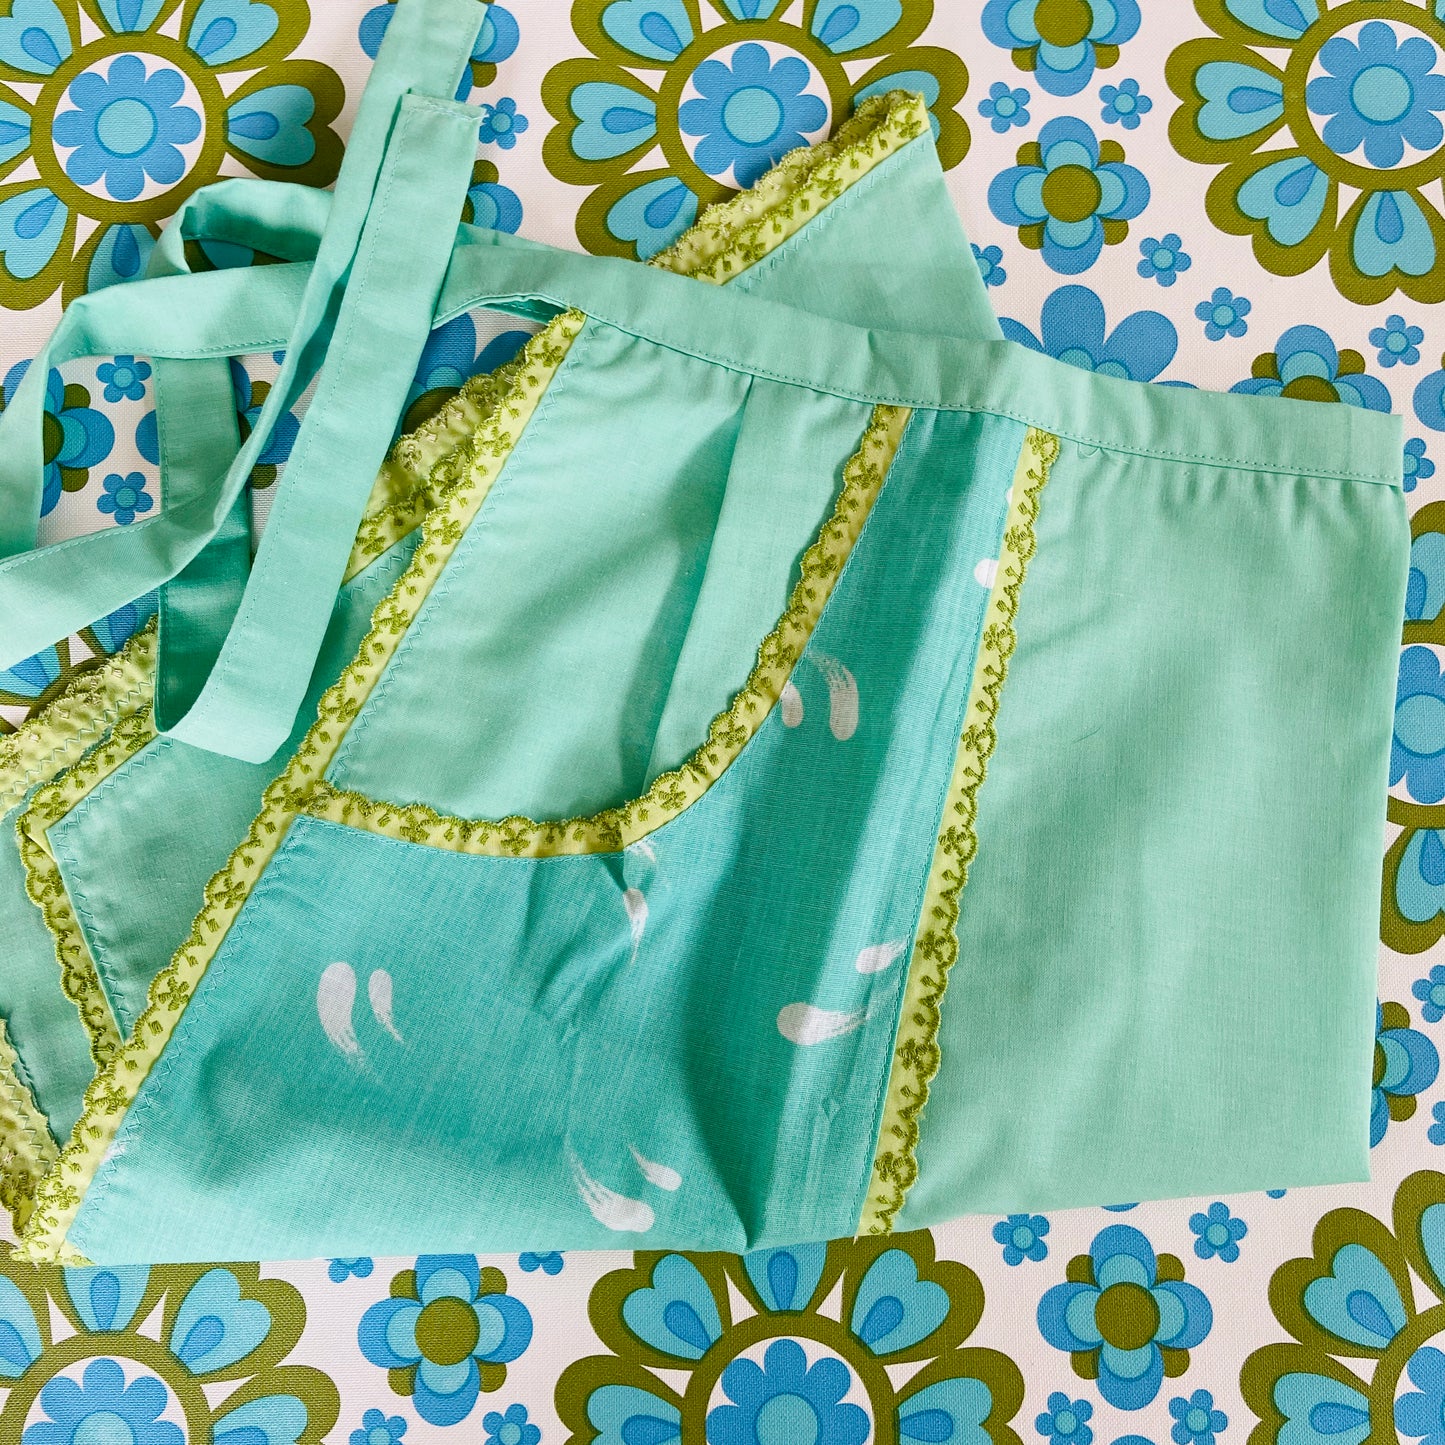 UNUSED Peppermint GREEN Apron Vintage Chic 50's FUN